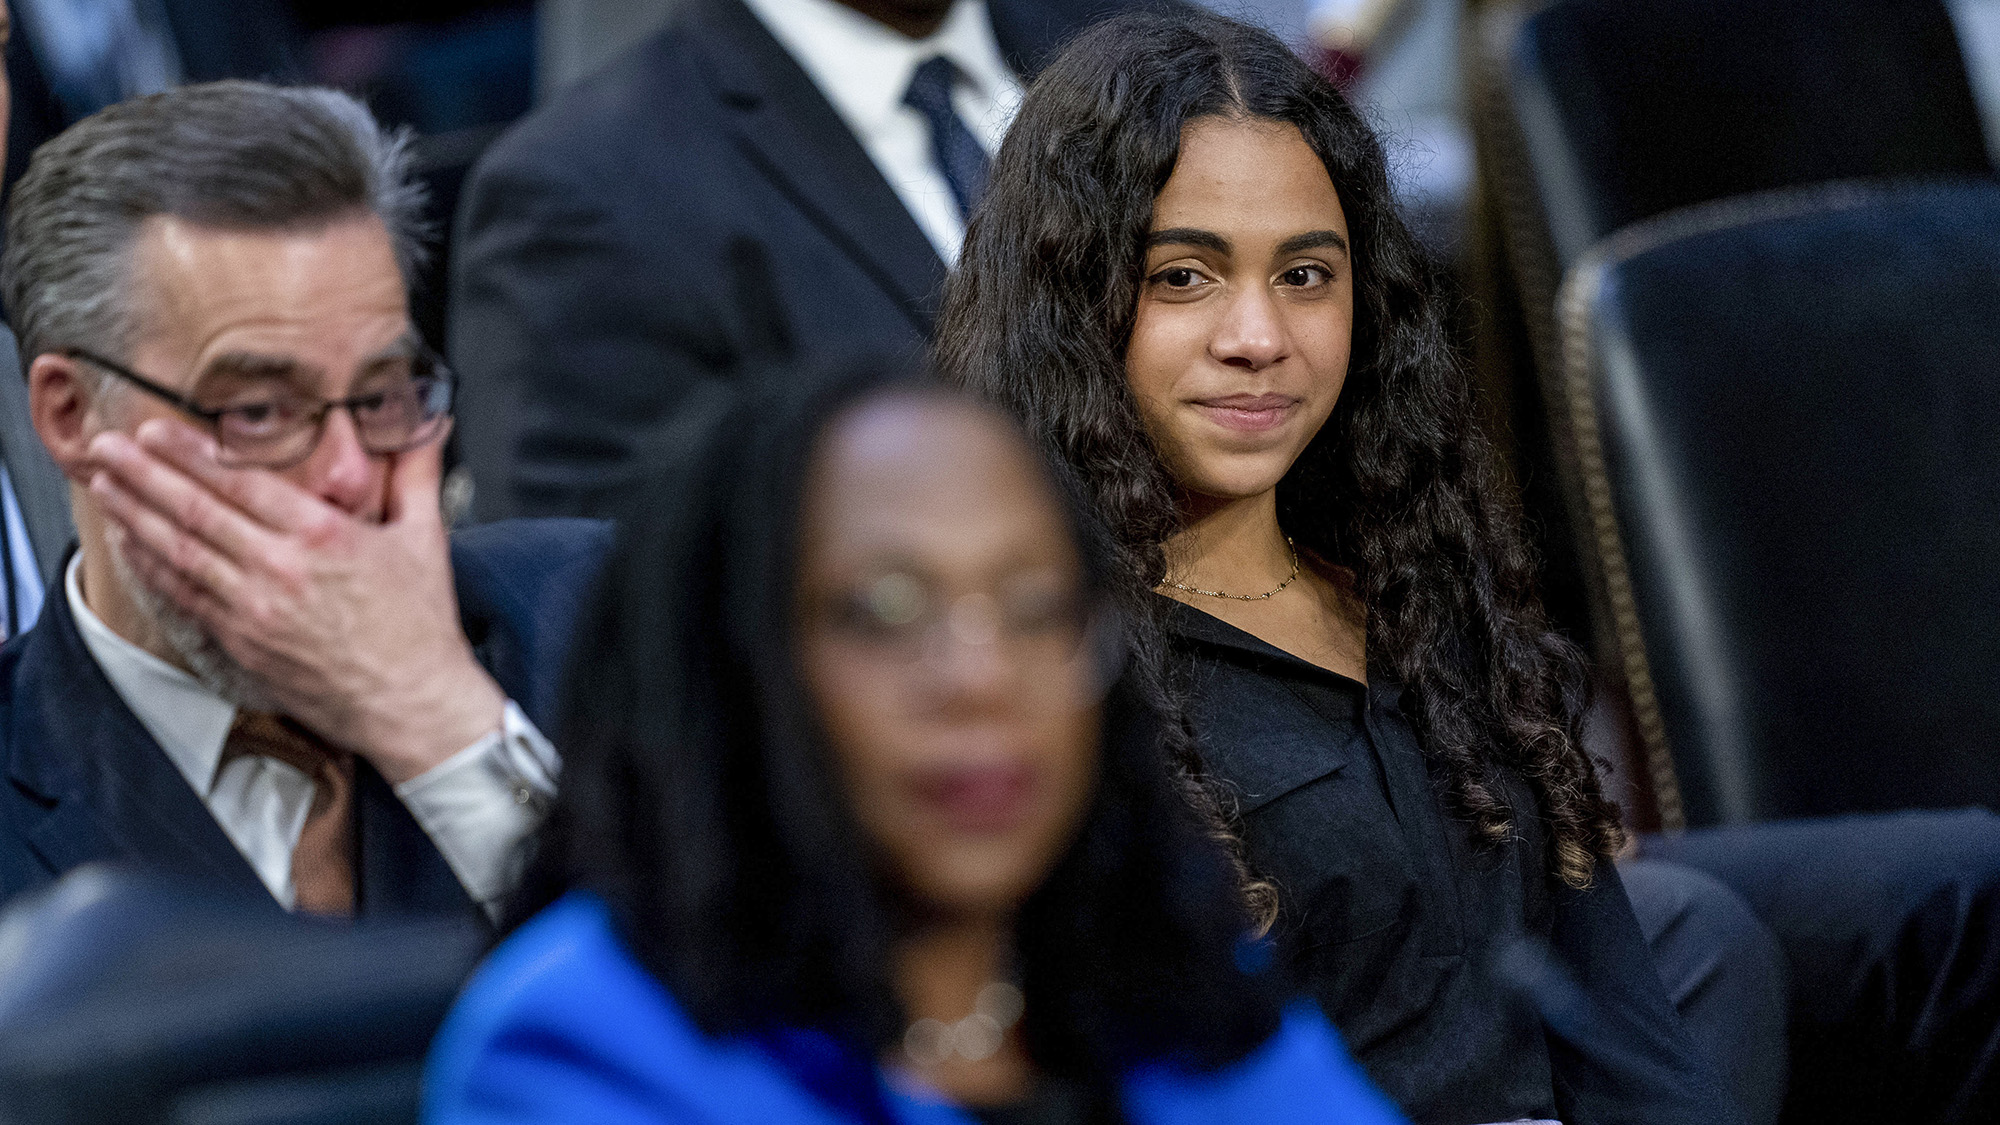 Leila Jackson, right, watches as her parents Dr. Patrick Jackson, left, and Supreme Court nominee Ketanji Brown Jackson, foreground, become emotional during a back and forth with Sen. Alex Padilla on Wednesday, March 23.